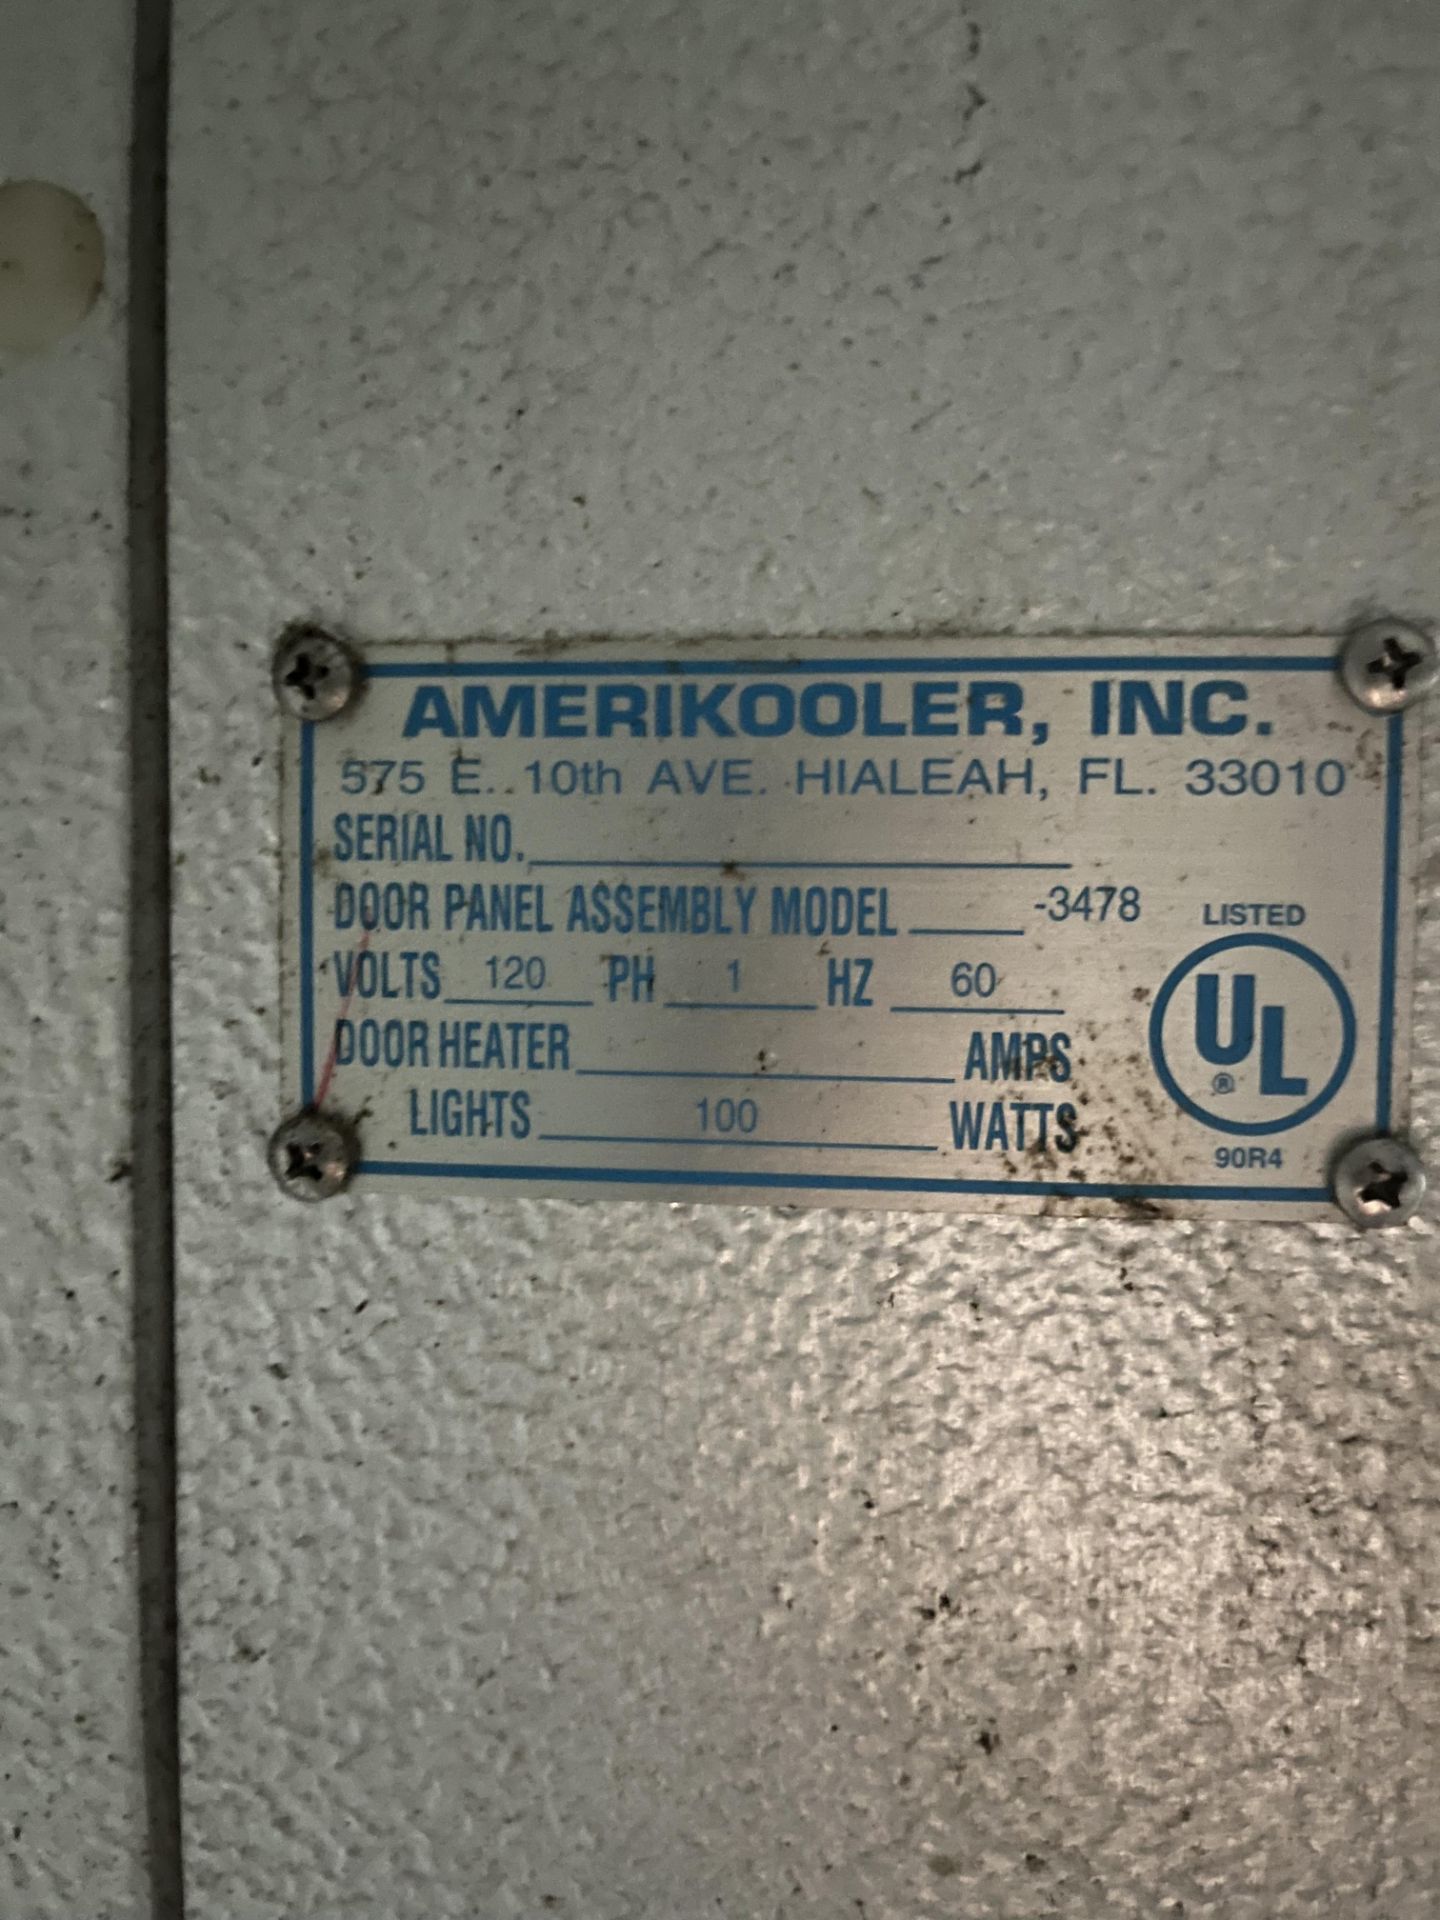 WALK IN AMERI KOOLER (INSIDE DIMS 7" 1" W 5" 2"L H 6"10 (Located Cleveland, OH) - Image 4 of 4